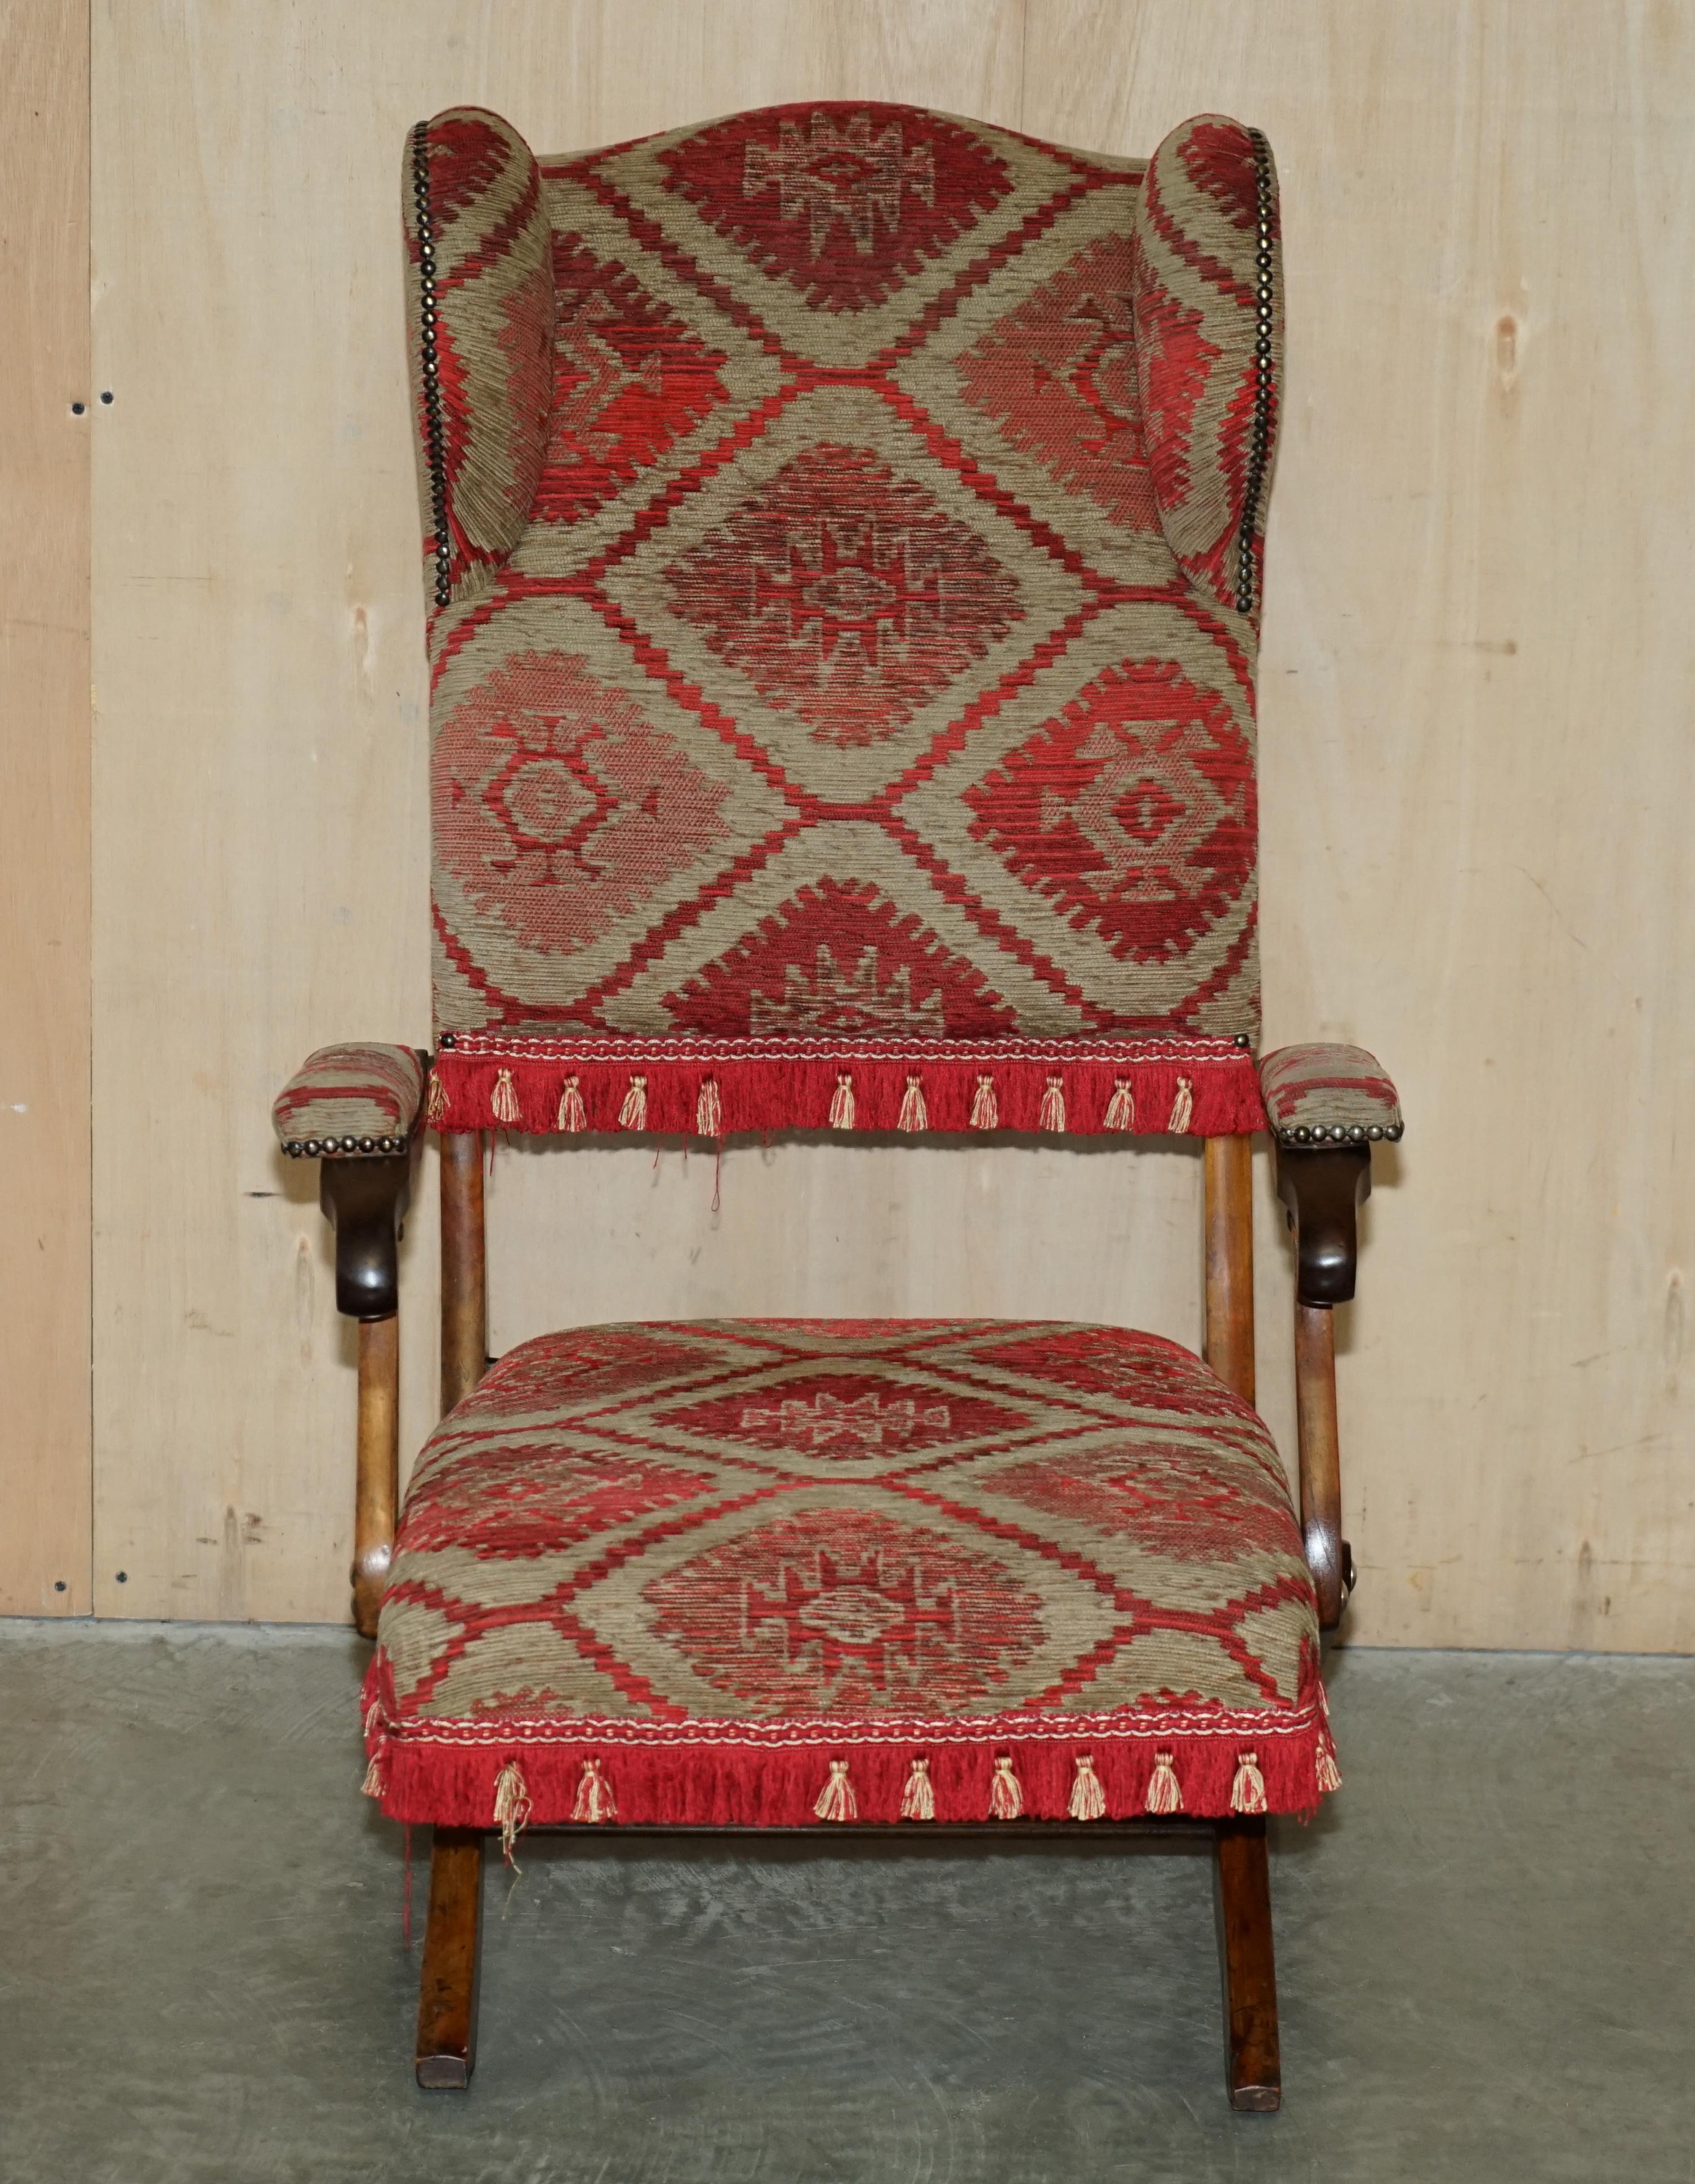 We are delighted to offer for sale this sublime original Victorian circa 1880 hand made Military Campaign folding chair with Kilim upholstery 

A very good looking and highly collectable Campaign steamer folding chair. This is the only one I have